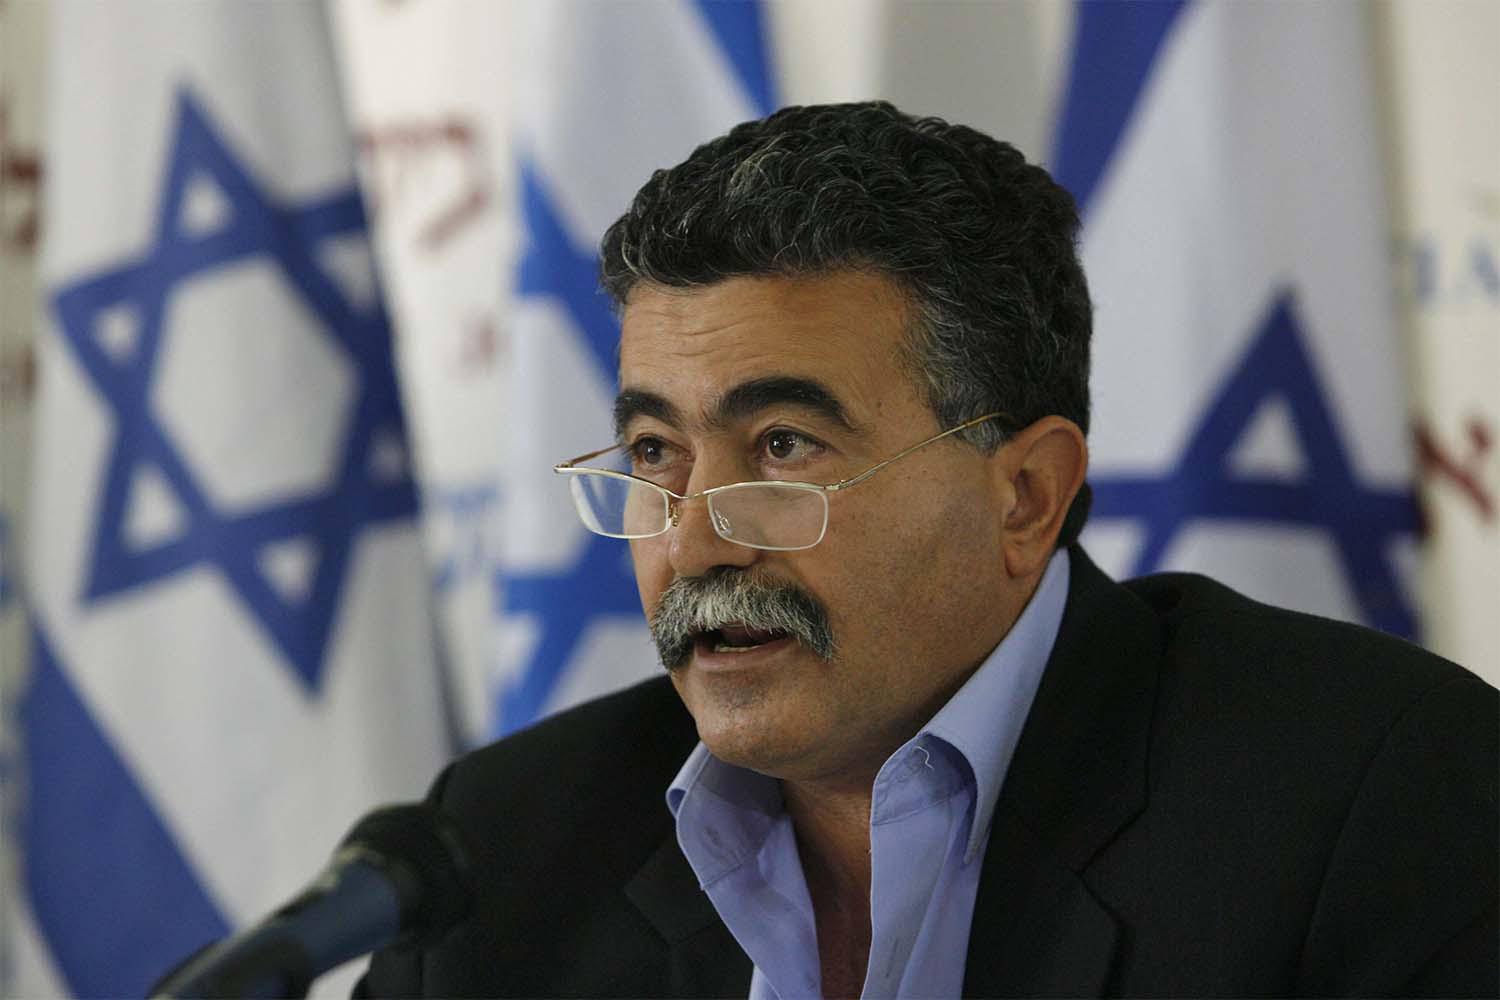 Peretz: Opening the economic attaché office will give a significant boost to the various initiatives already underway